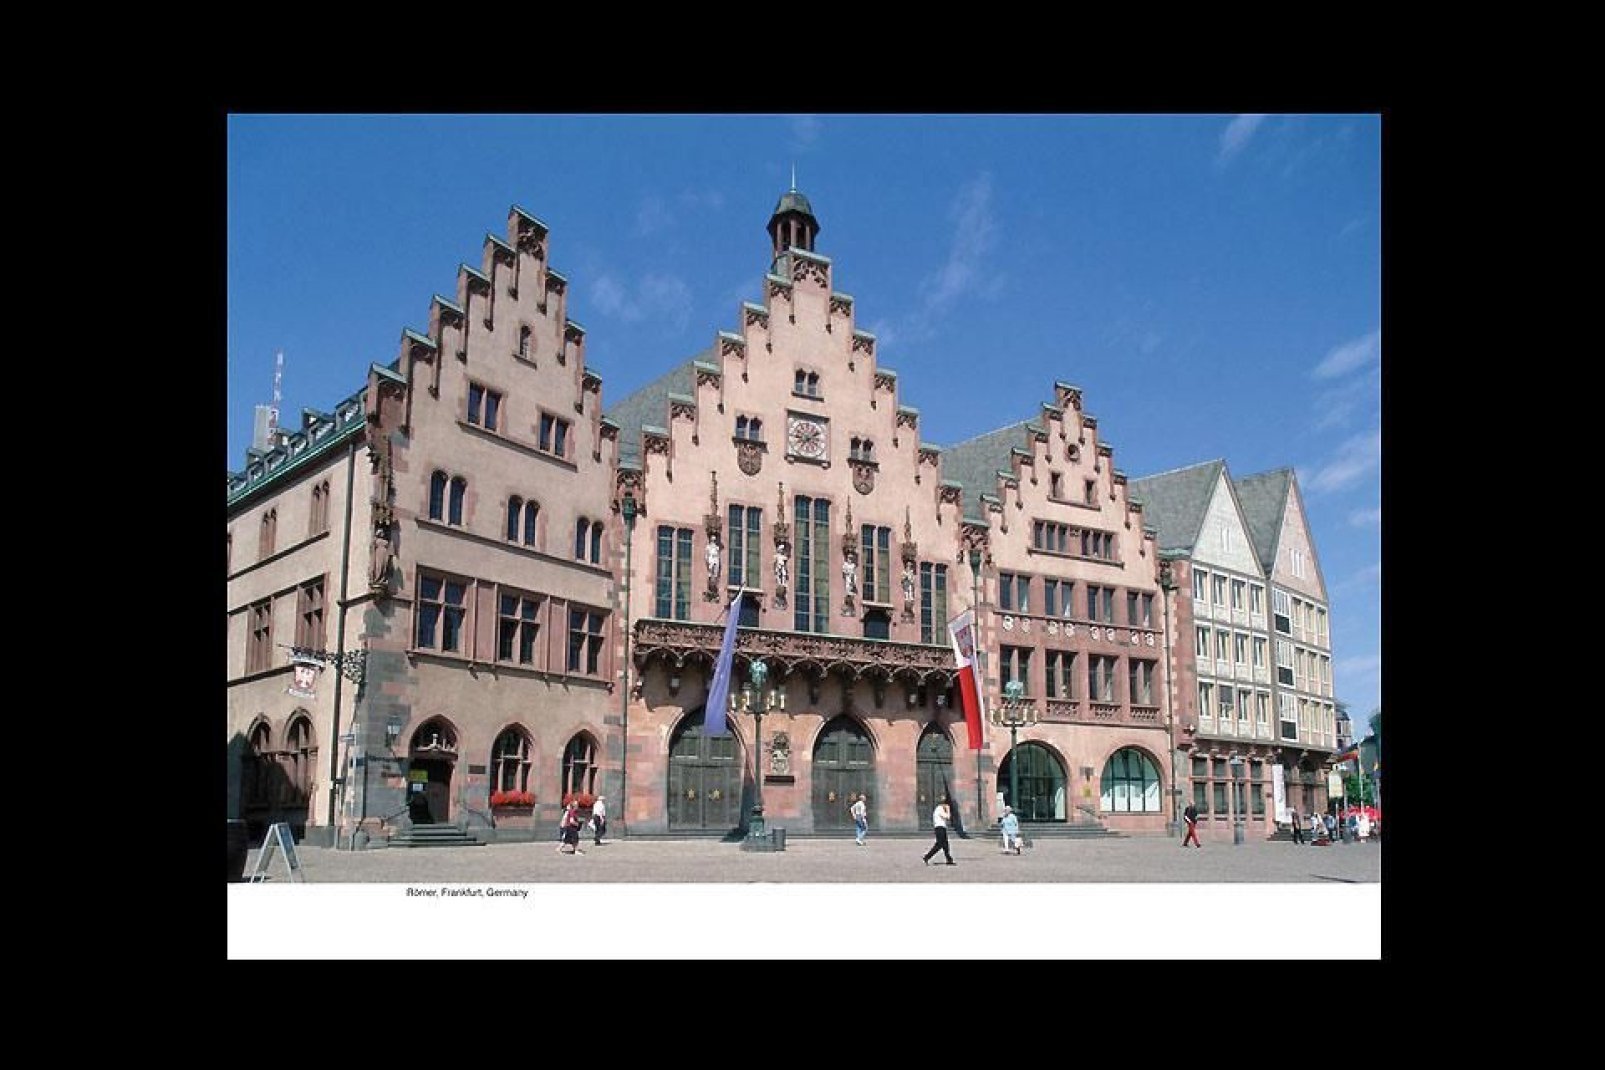 Frankfurt has both an old town and a modern centre to offer its visitors.